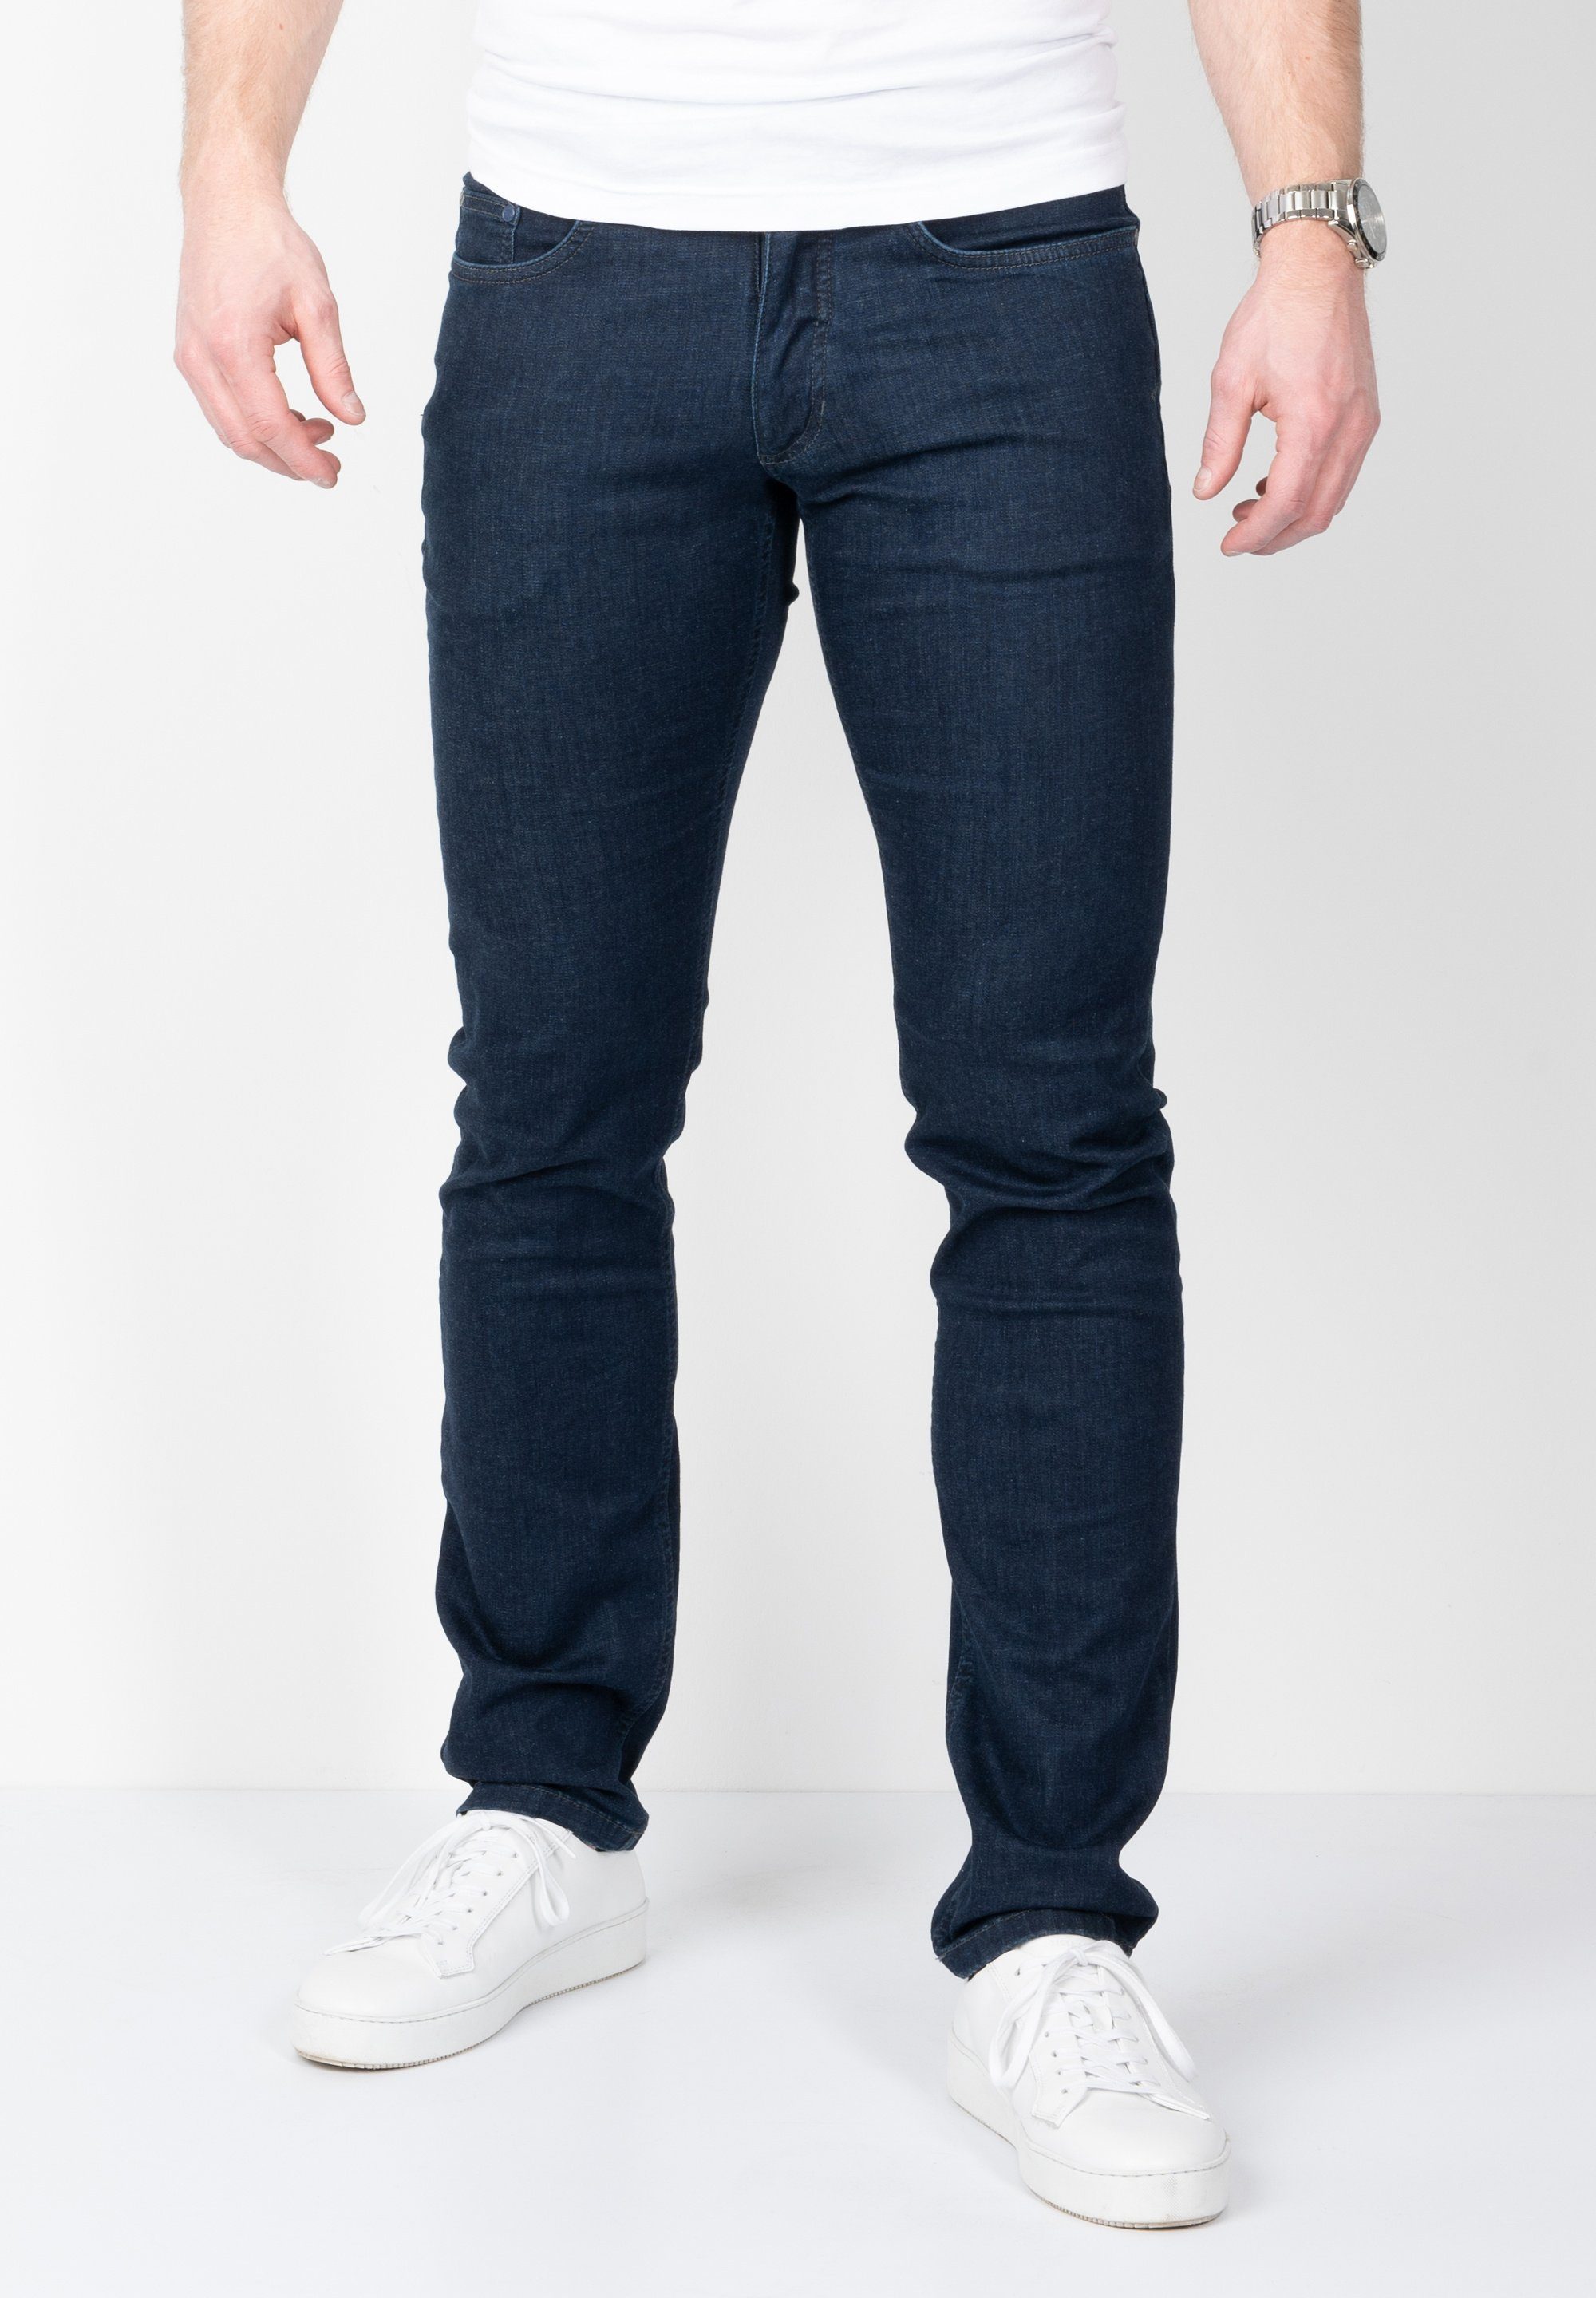 SUNWILL Straight-Jeans Super Stretch in Fitted Fit dark navy